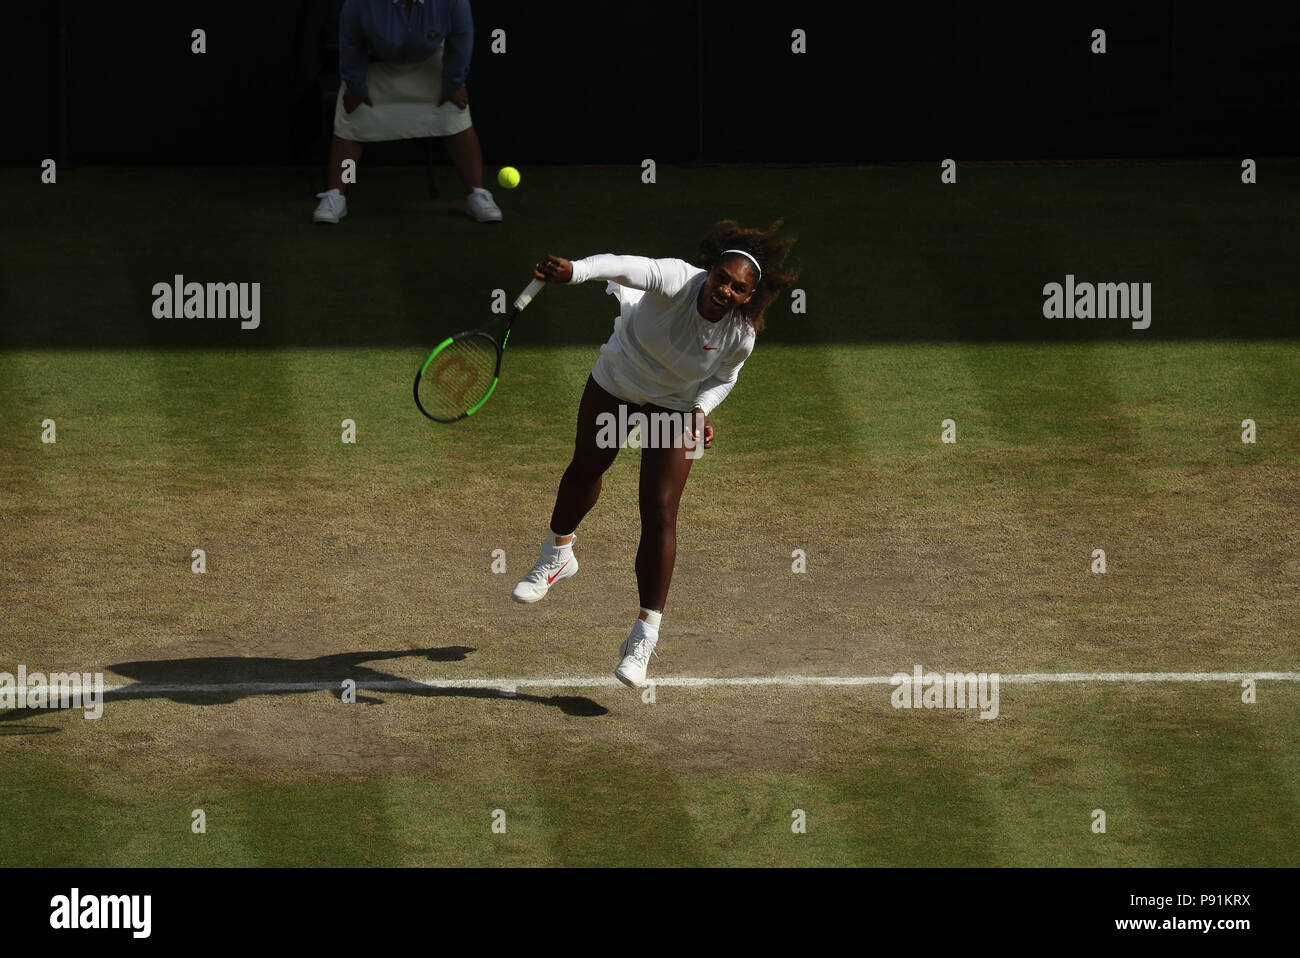 London, UK, London, UK. 14th July 2018. The Wimbledon Tennis Championships, Day 12; Womens Final, Serena Williams (USA) versus Angelique Kerber (DEU); Williams serving Credit: Action Plus Sports Images/Alamy Live News Credit: Action Plus Sports Images/Alamy Live News Credit: Action Plus Sports Images/Alamy Live News Stock Photo